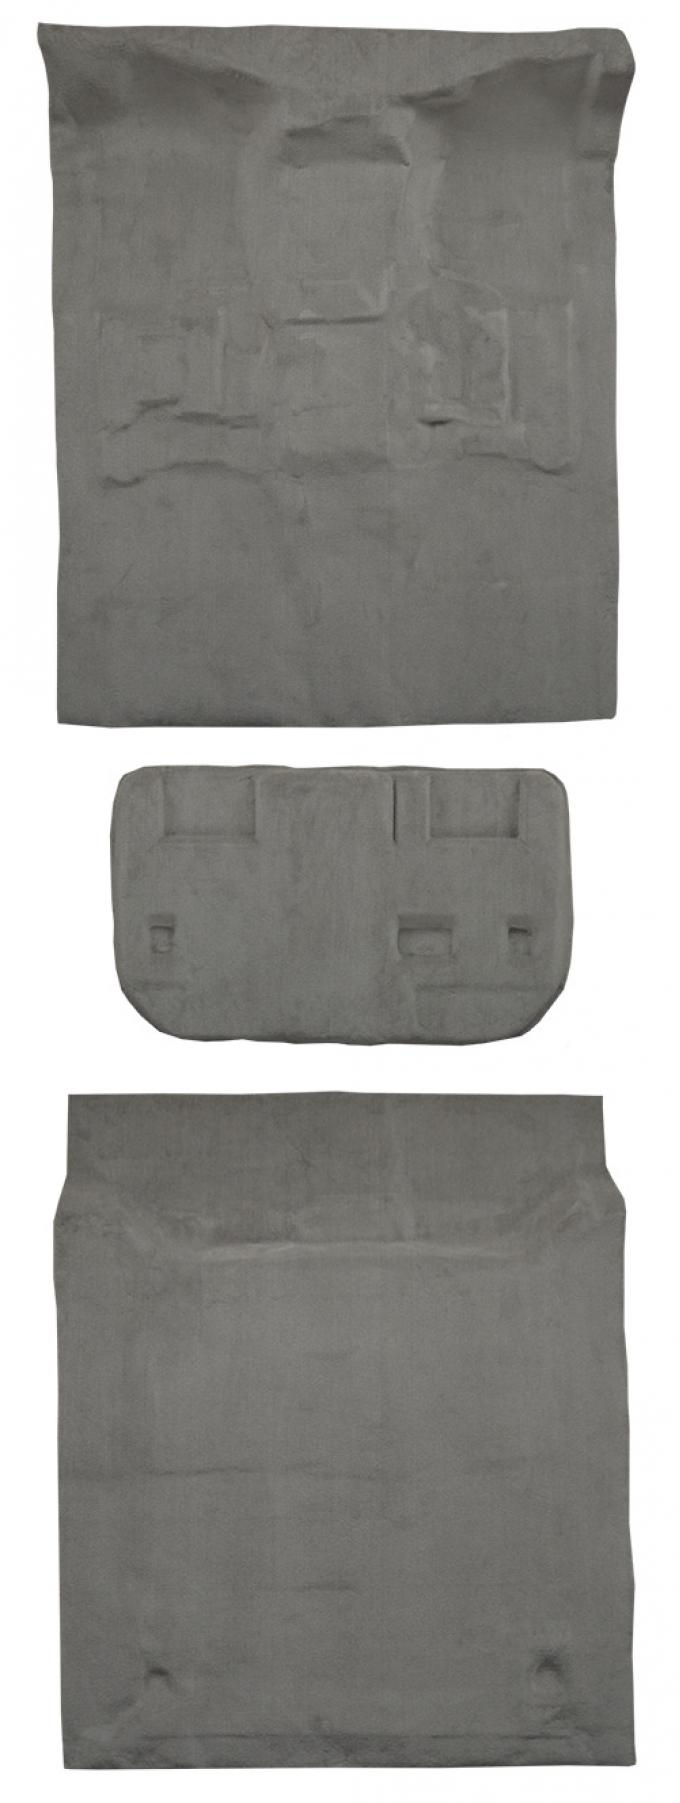 ACC 2007-2009 Chevrolet Suburban 1500 4DR w/2nd Row 60-40 Seat Mount Cover w/o Heel Pad Complete Cutpile Carpet